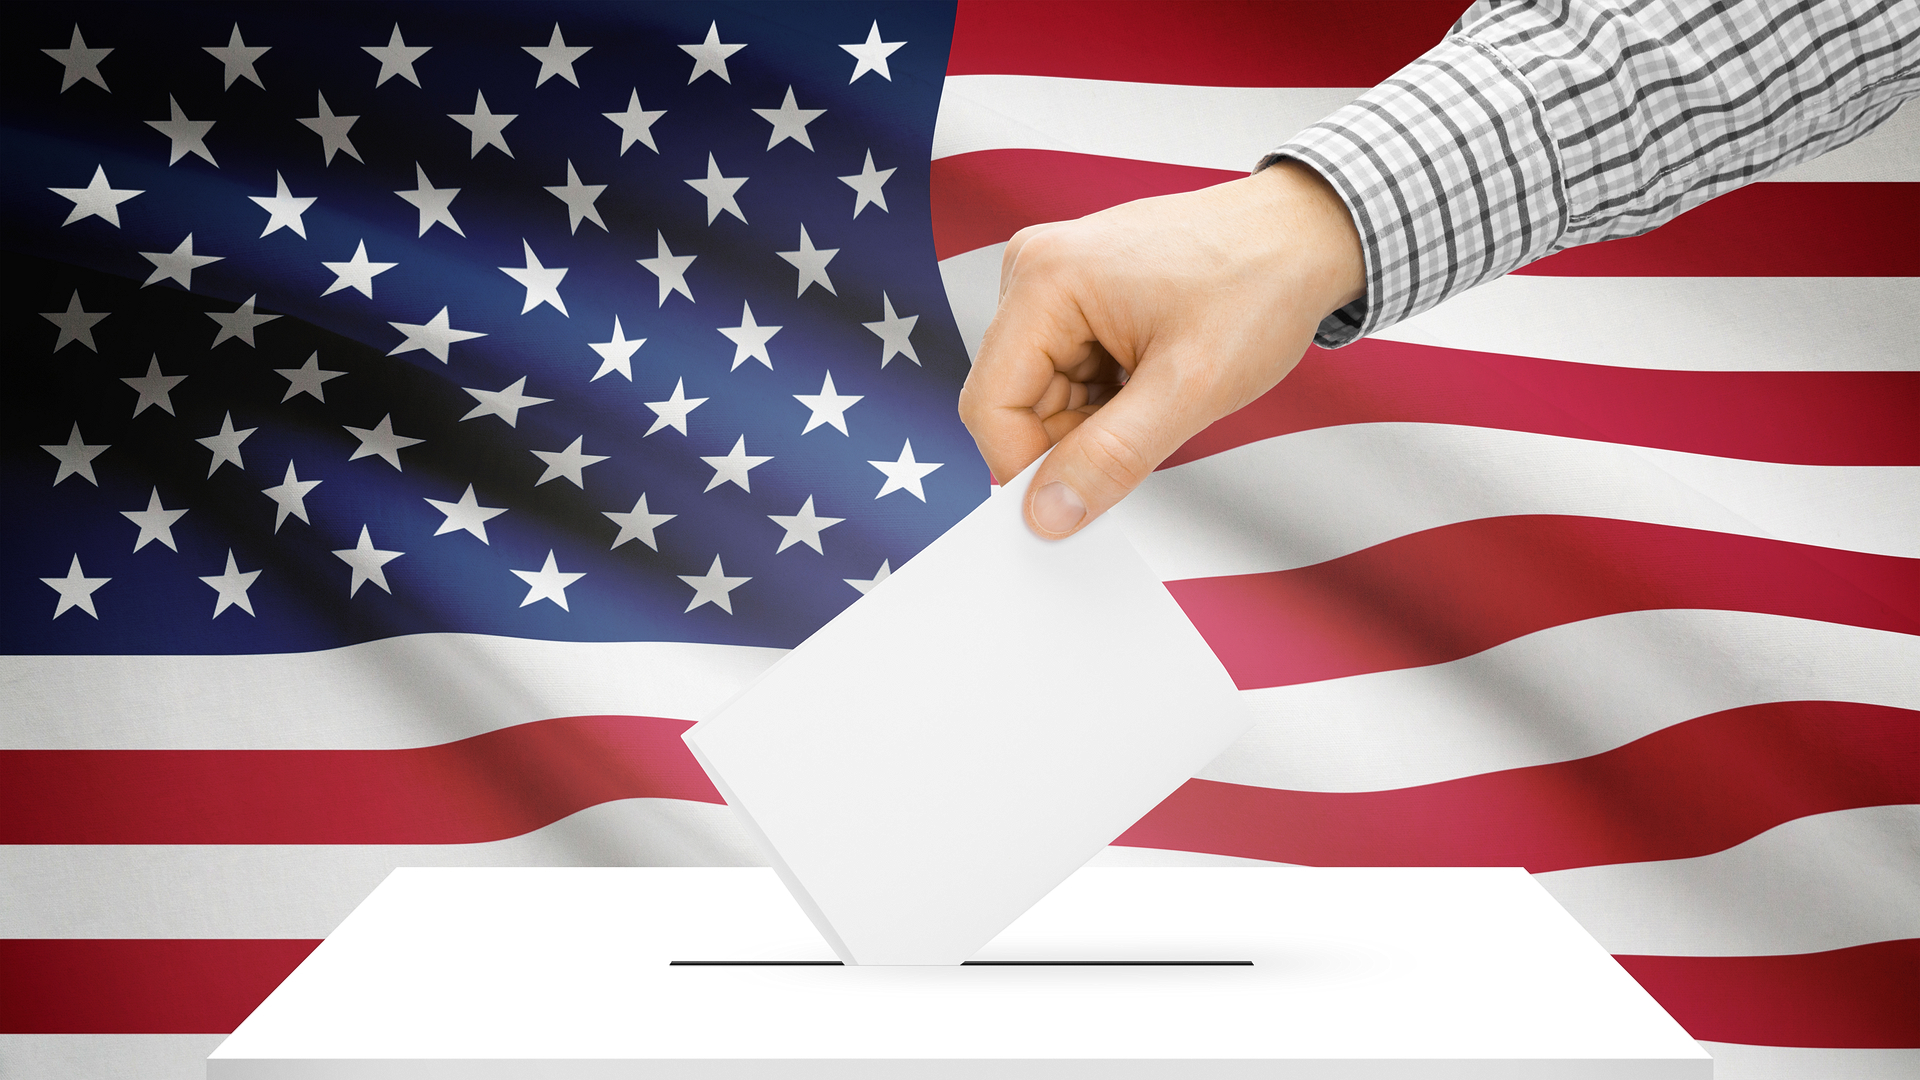 Voting in United States elections